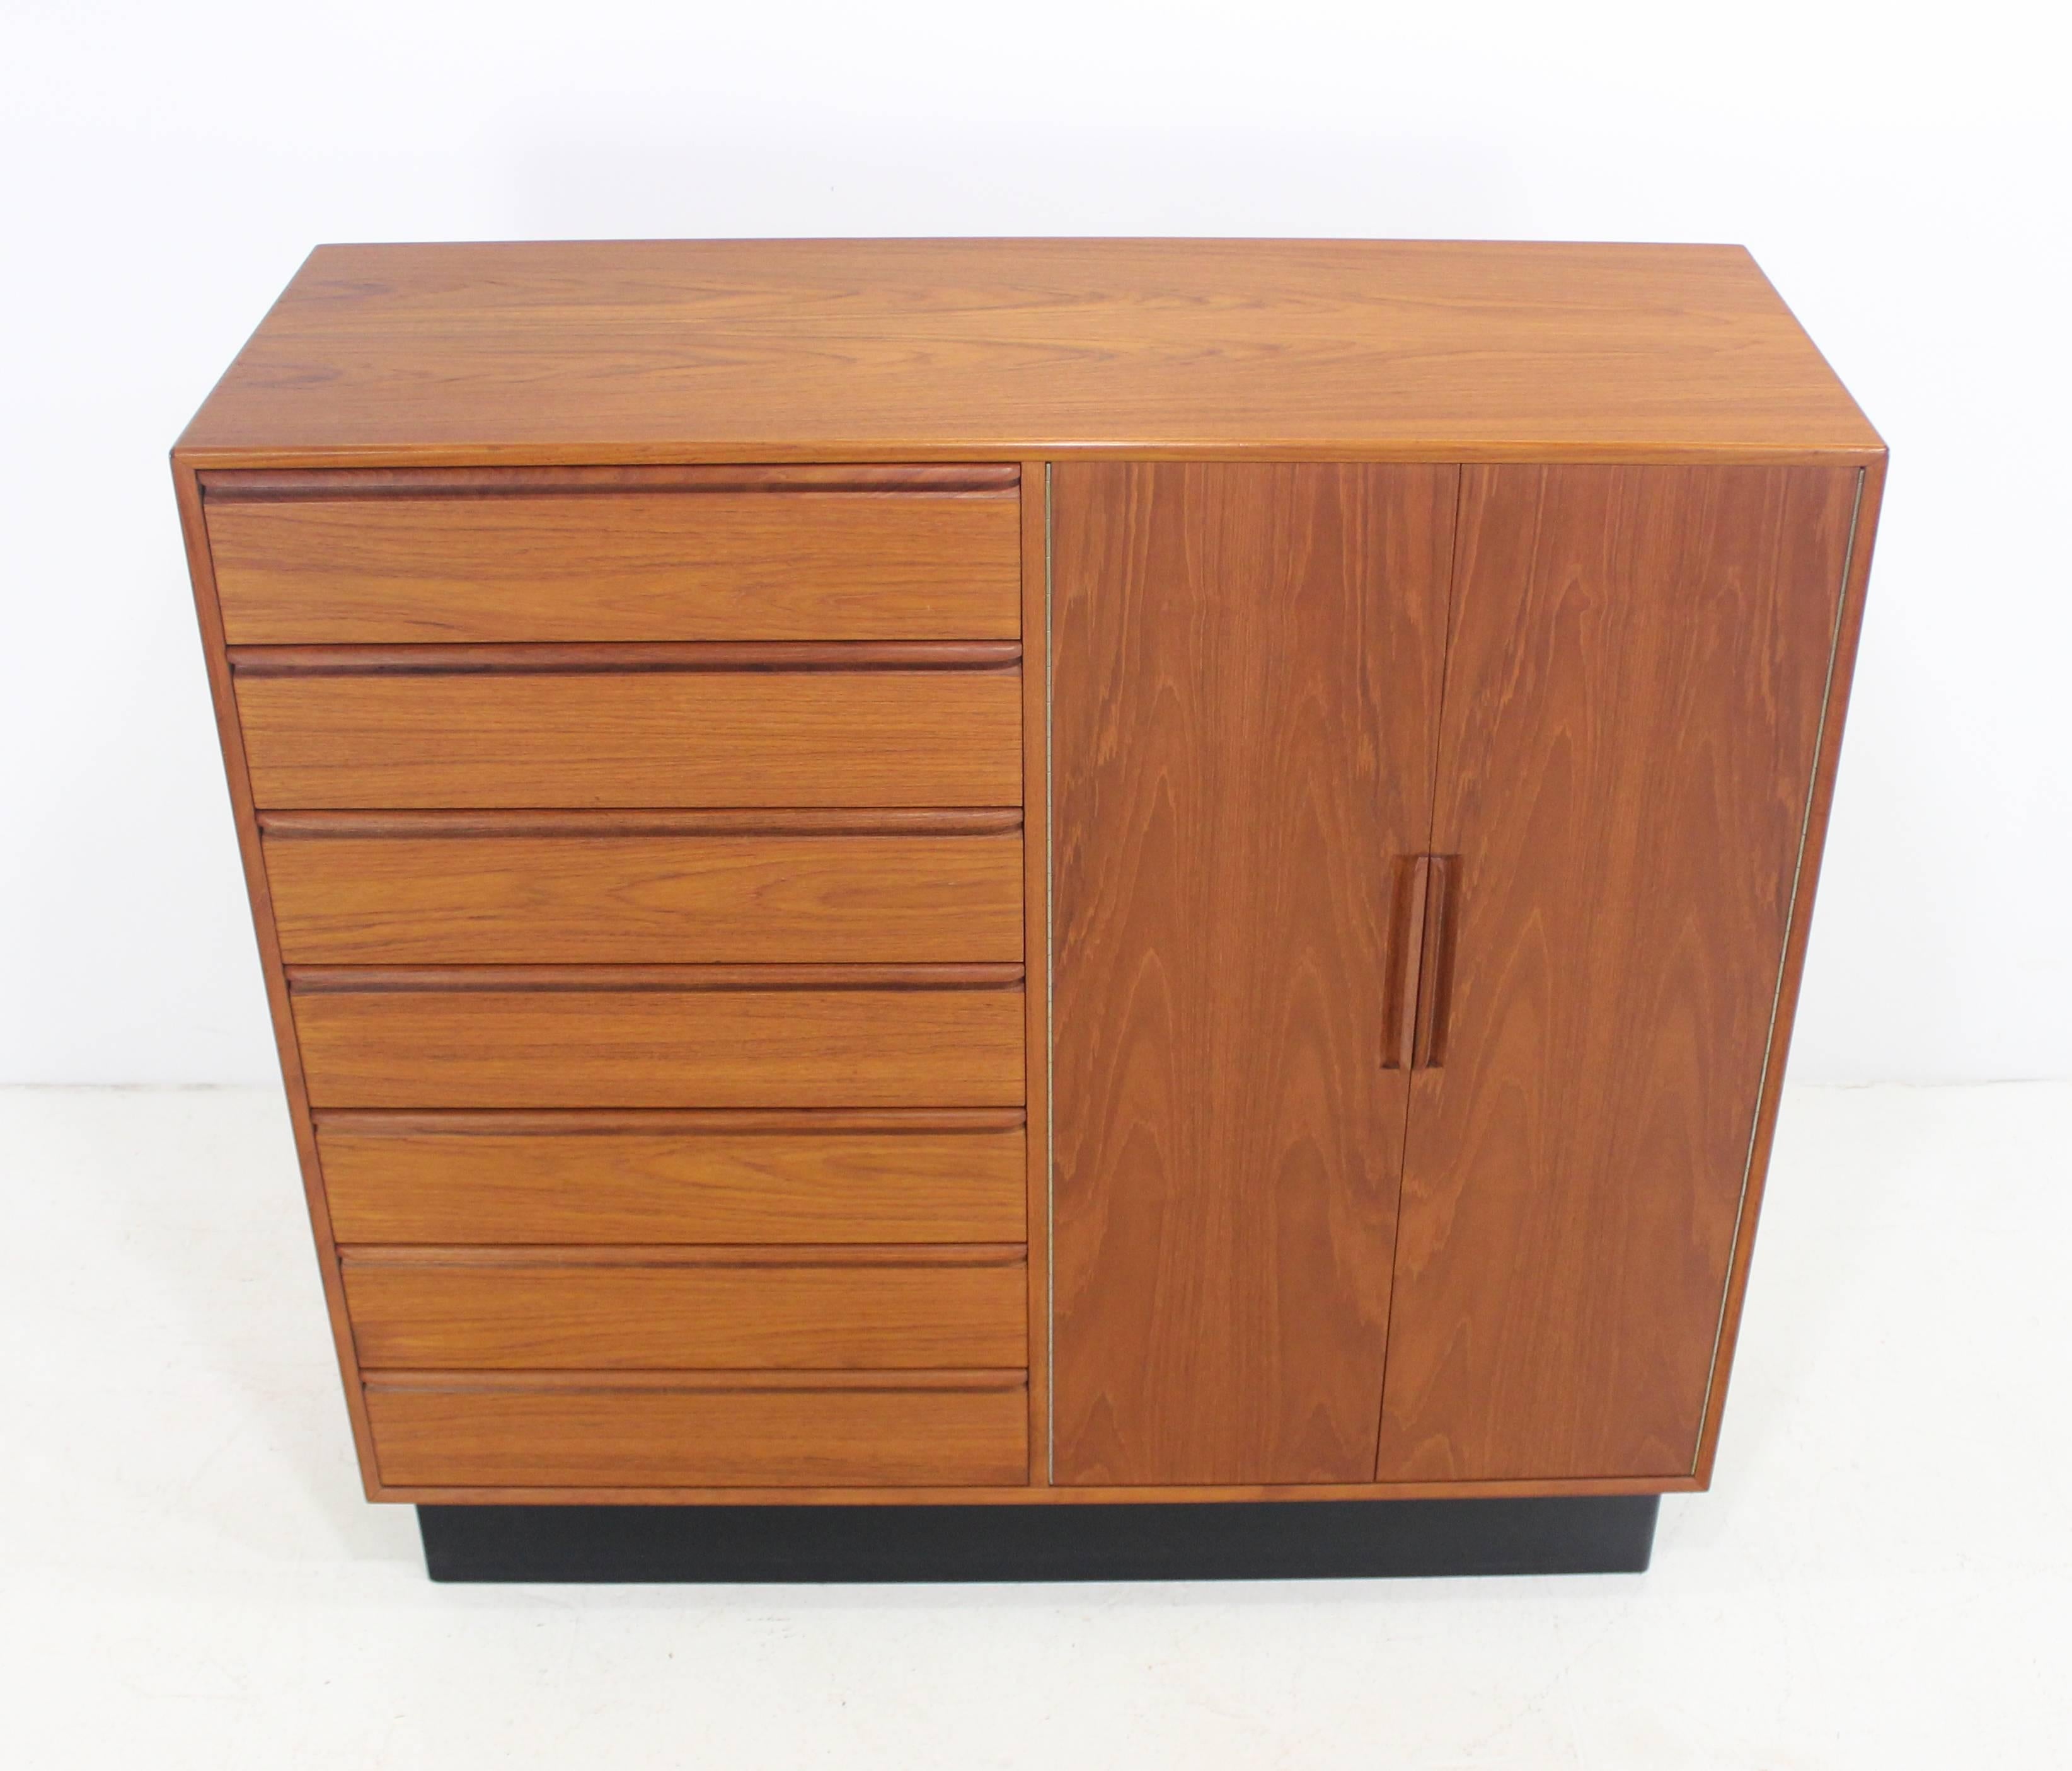 Scandinavian Modern gentleman's chest by Westnofa Furniture.
Honey colored teak with black plinth base.
Doors open to seven drawers on the right.
Seven drawers on the left.
Matchless quality and price.
Low freight, quick ship.

      